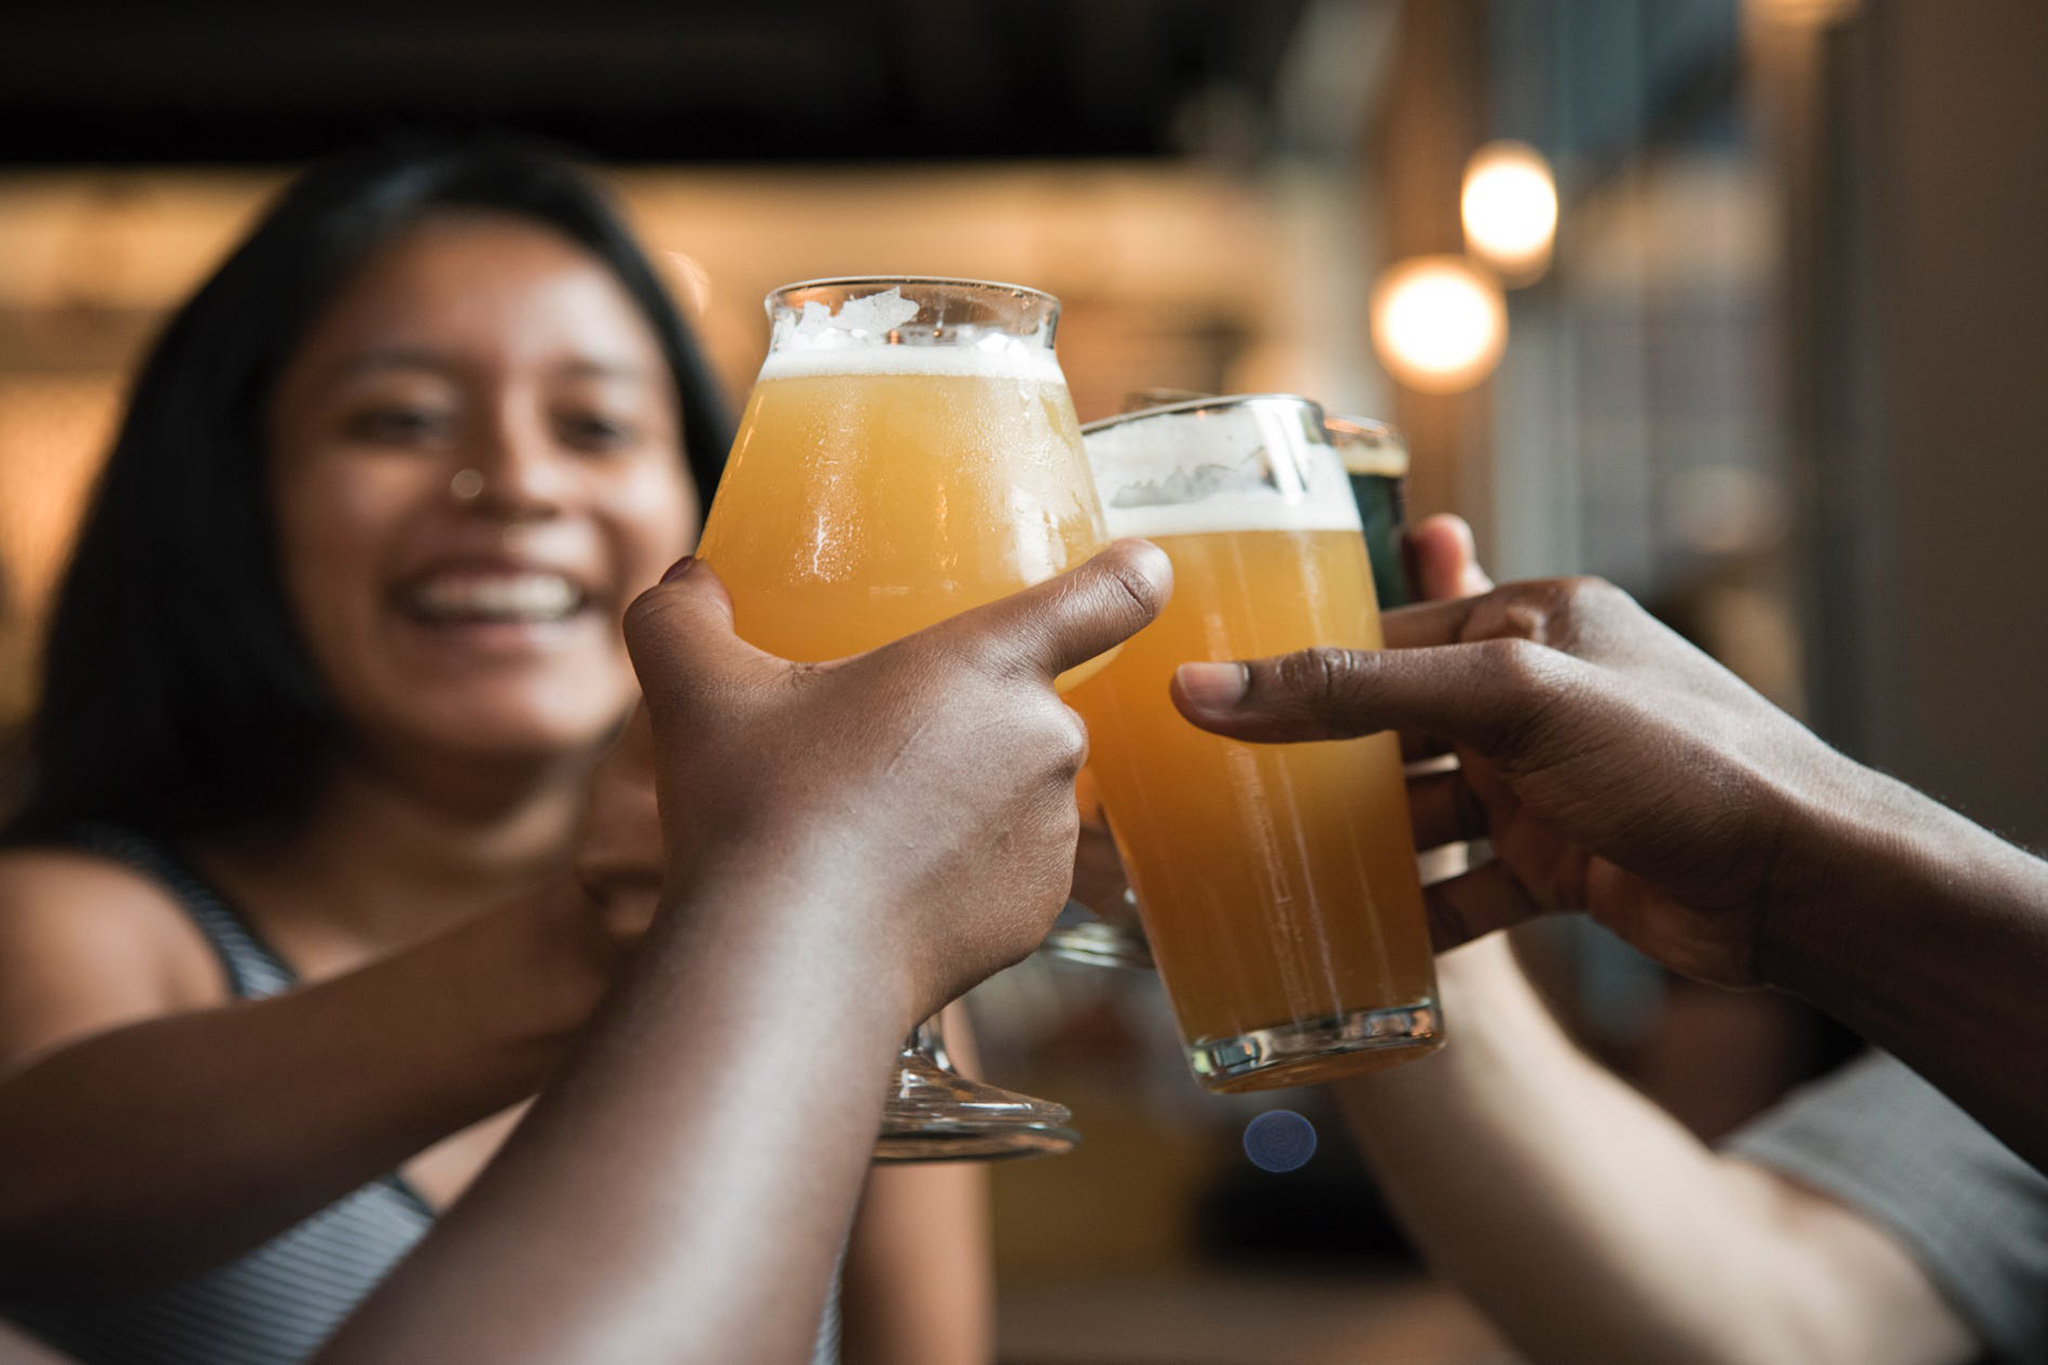 A happy hour beer toast among employees